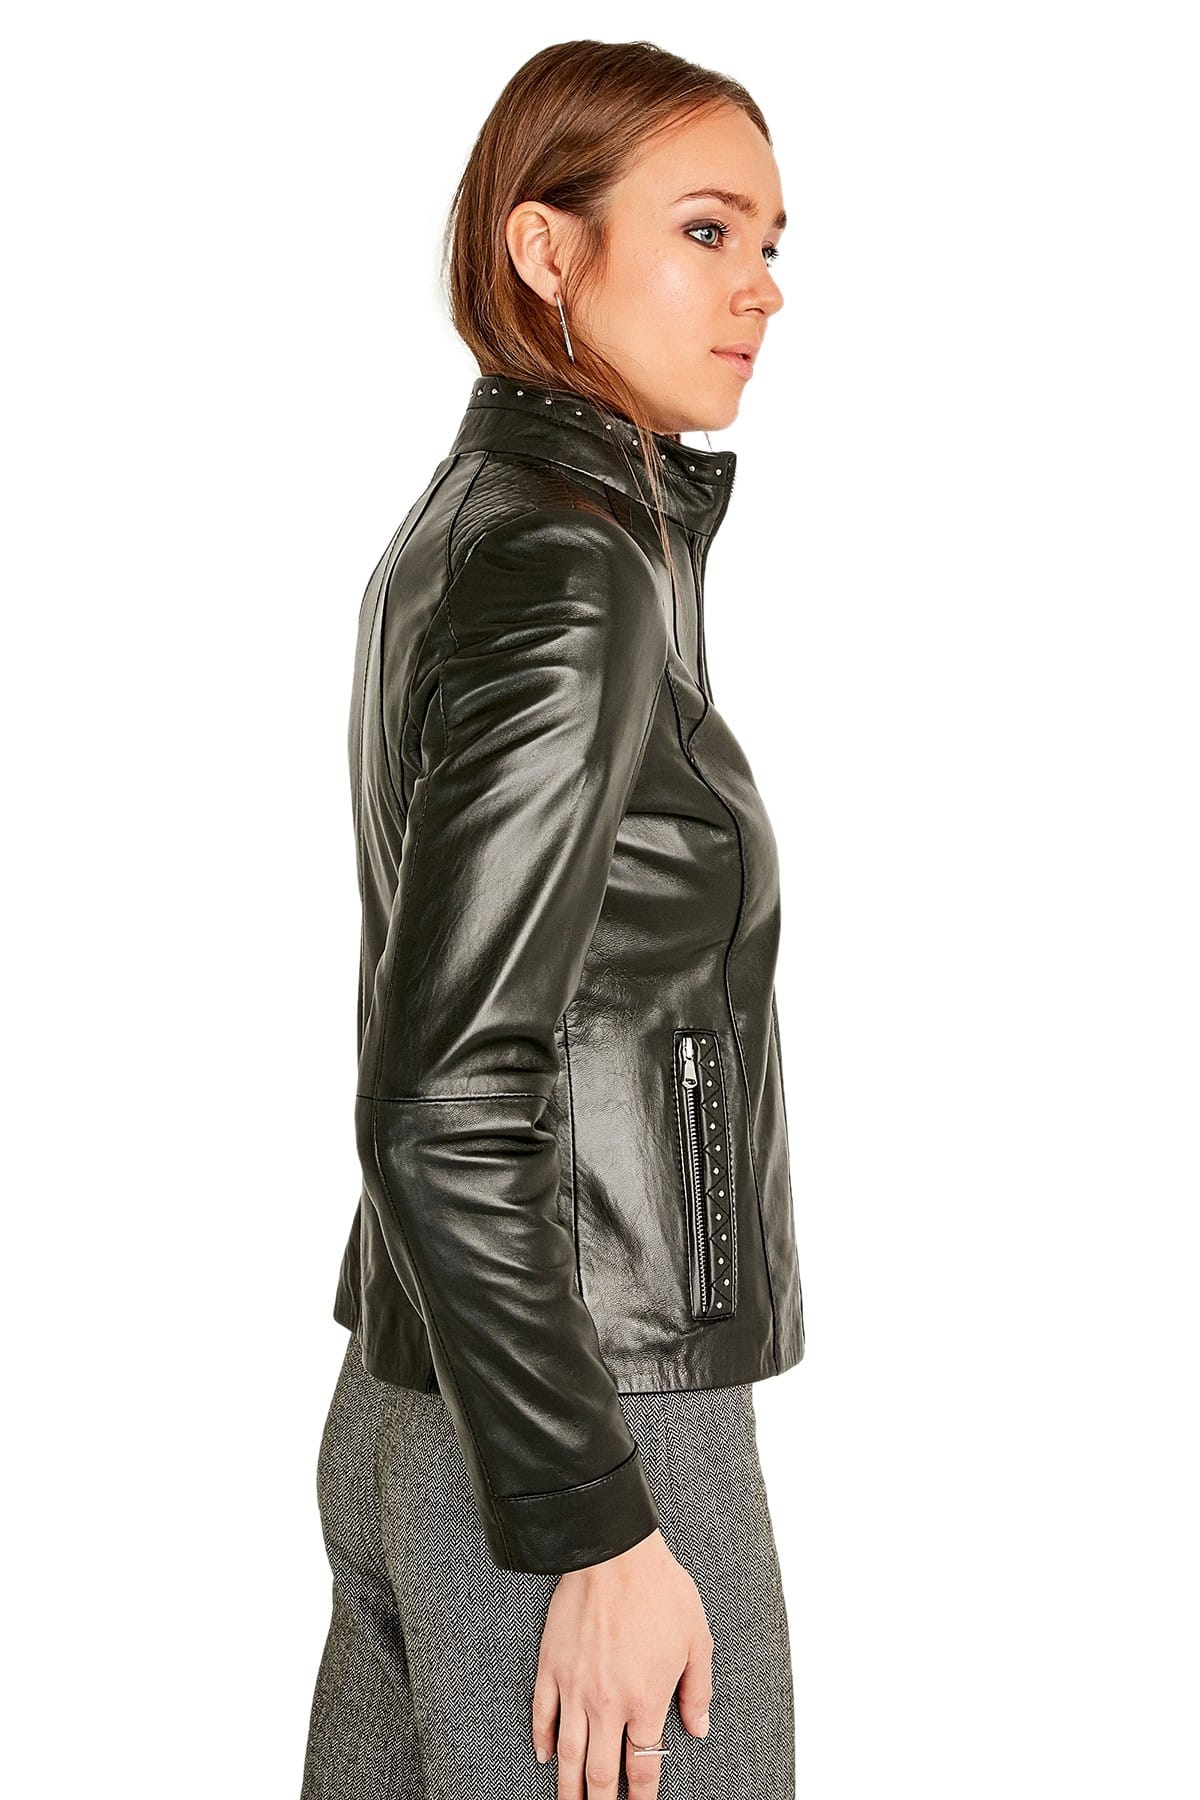 patent black leather jacket for womens